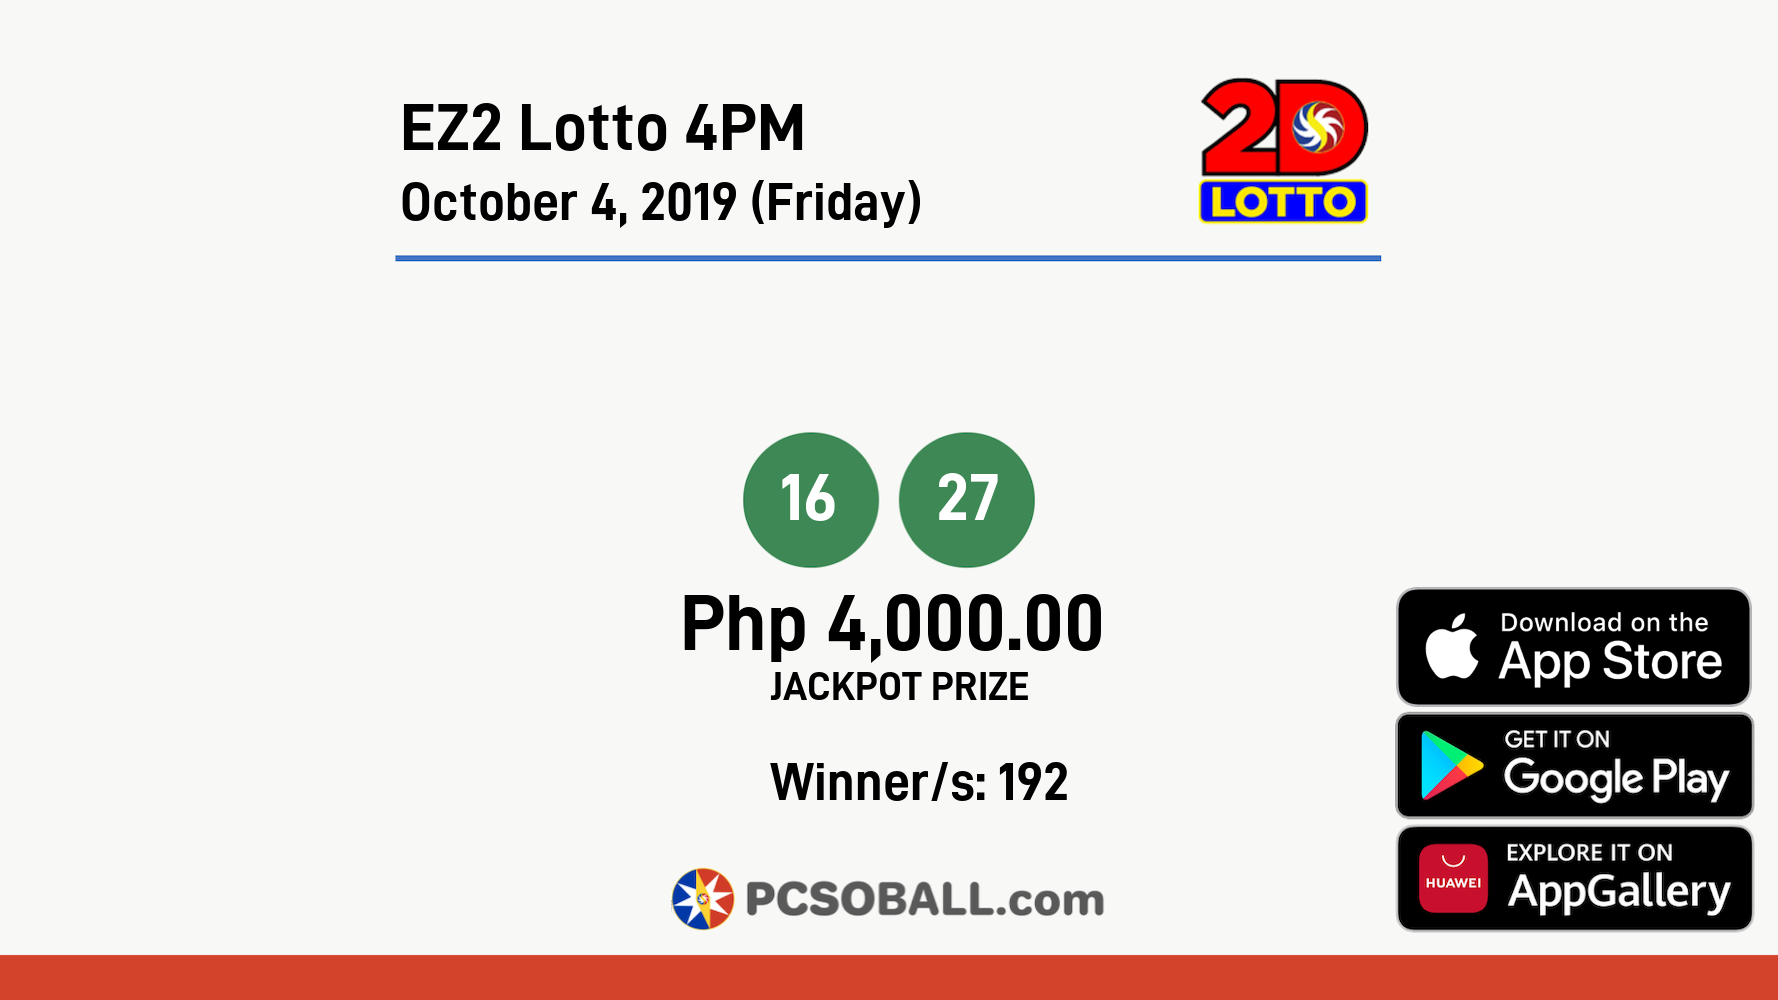 EZ2 Lotto 4PM October 4, 2019 (Friday) Result